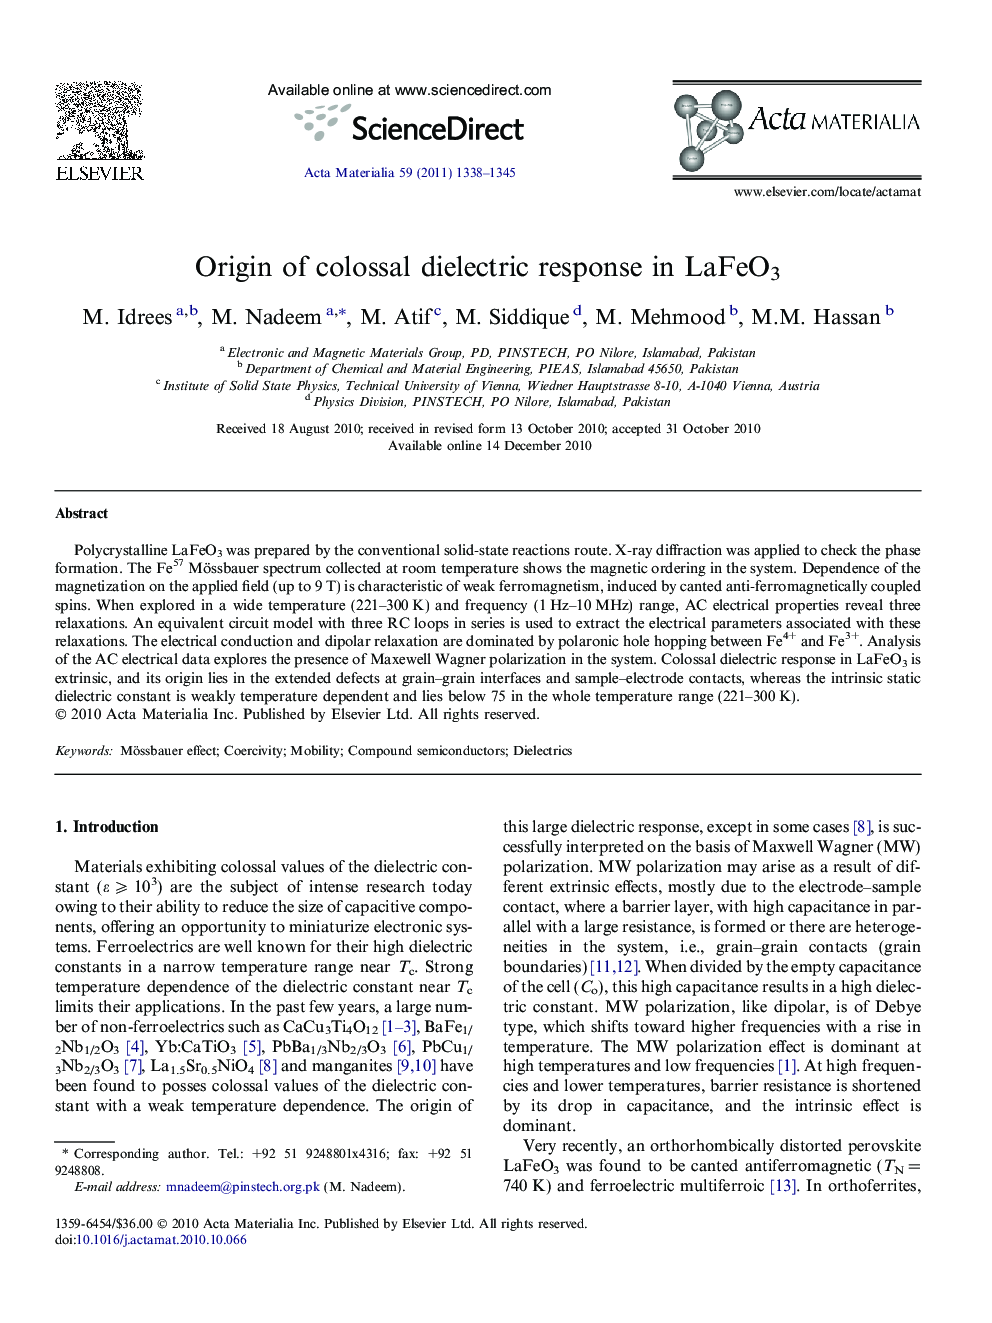 Origin of colossal dielectric response in LaFeO3